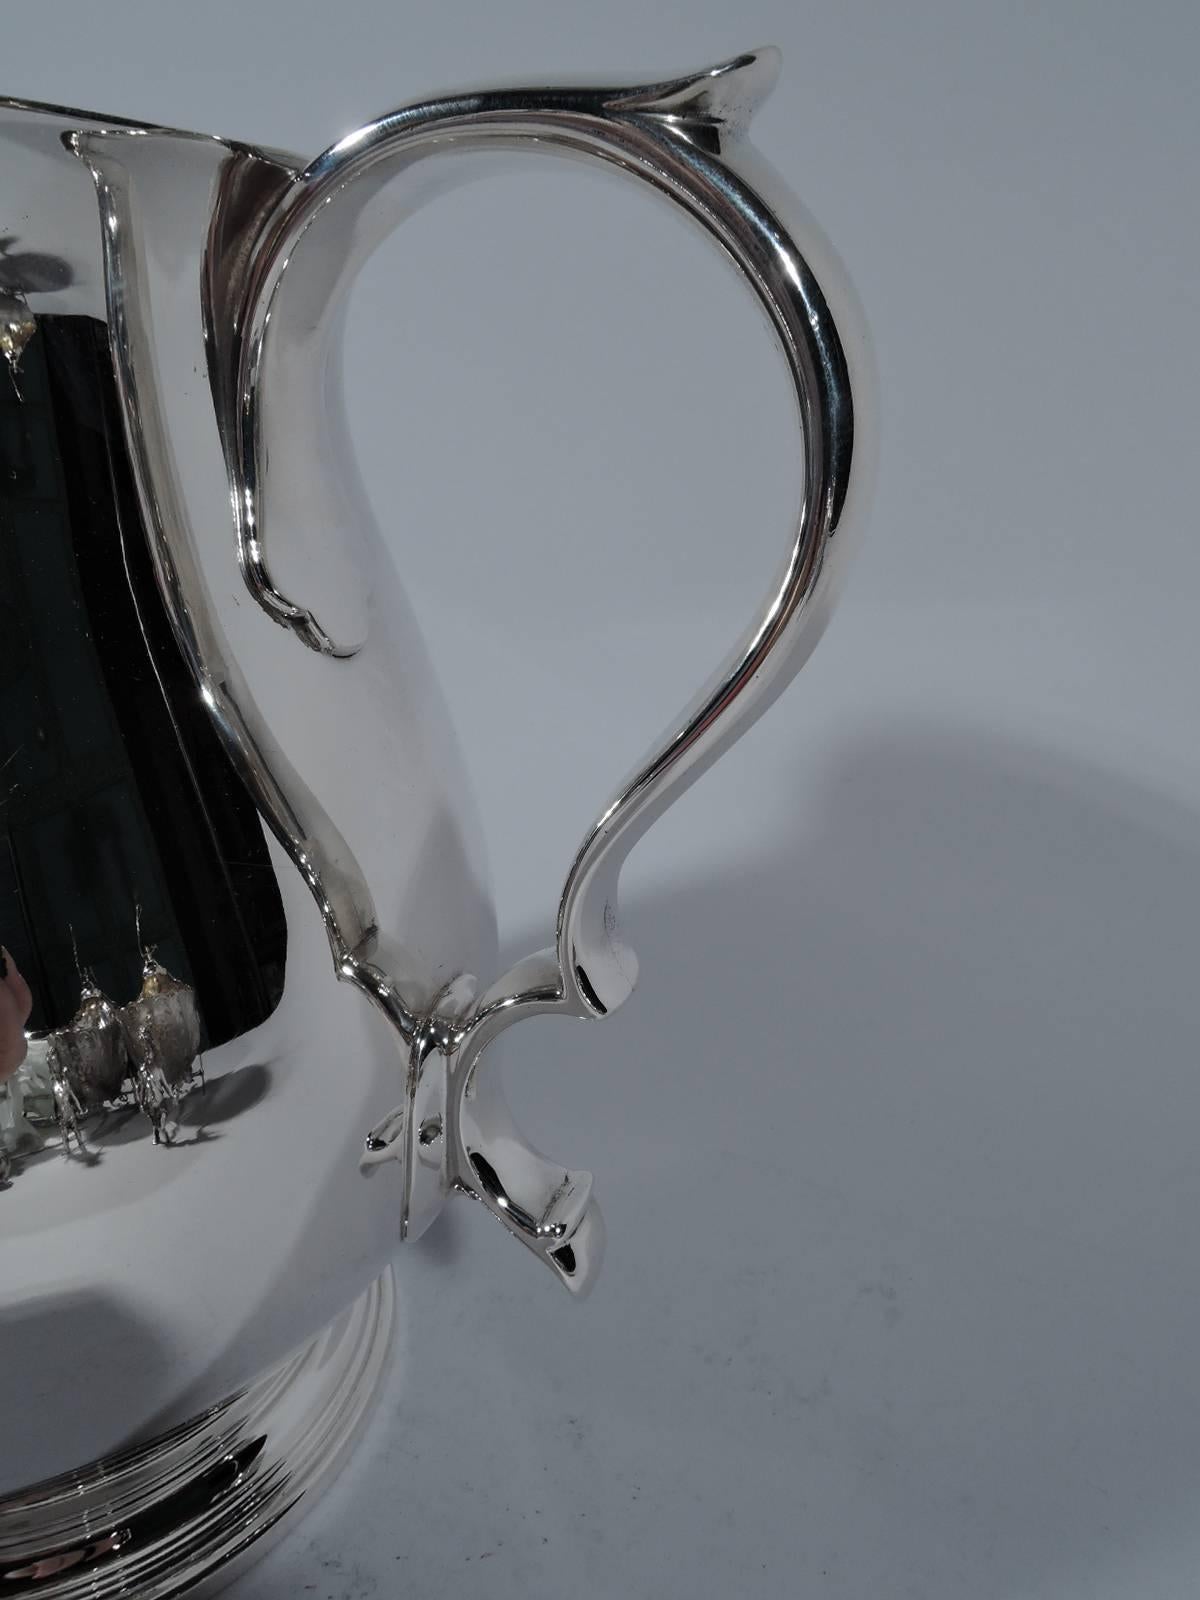 Stylish Modern sterling silver water pitcher. Made by Tiffany & Co. in New York. Curved body, flared, rim, capped double-scroll handle, and stepped foot. Spare and supple with a distinctive V-Form spout on front. Hallmark includes pattern no. 19873